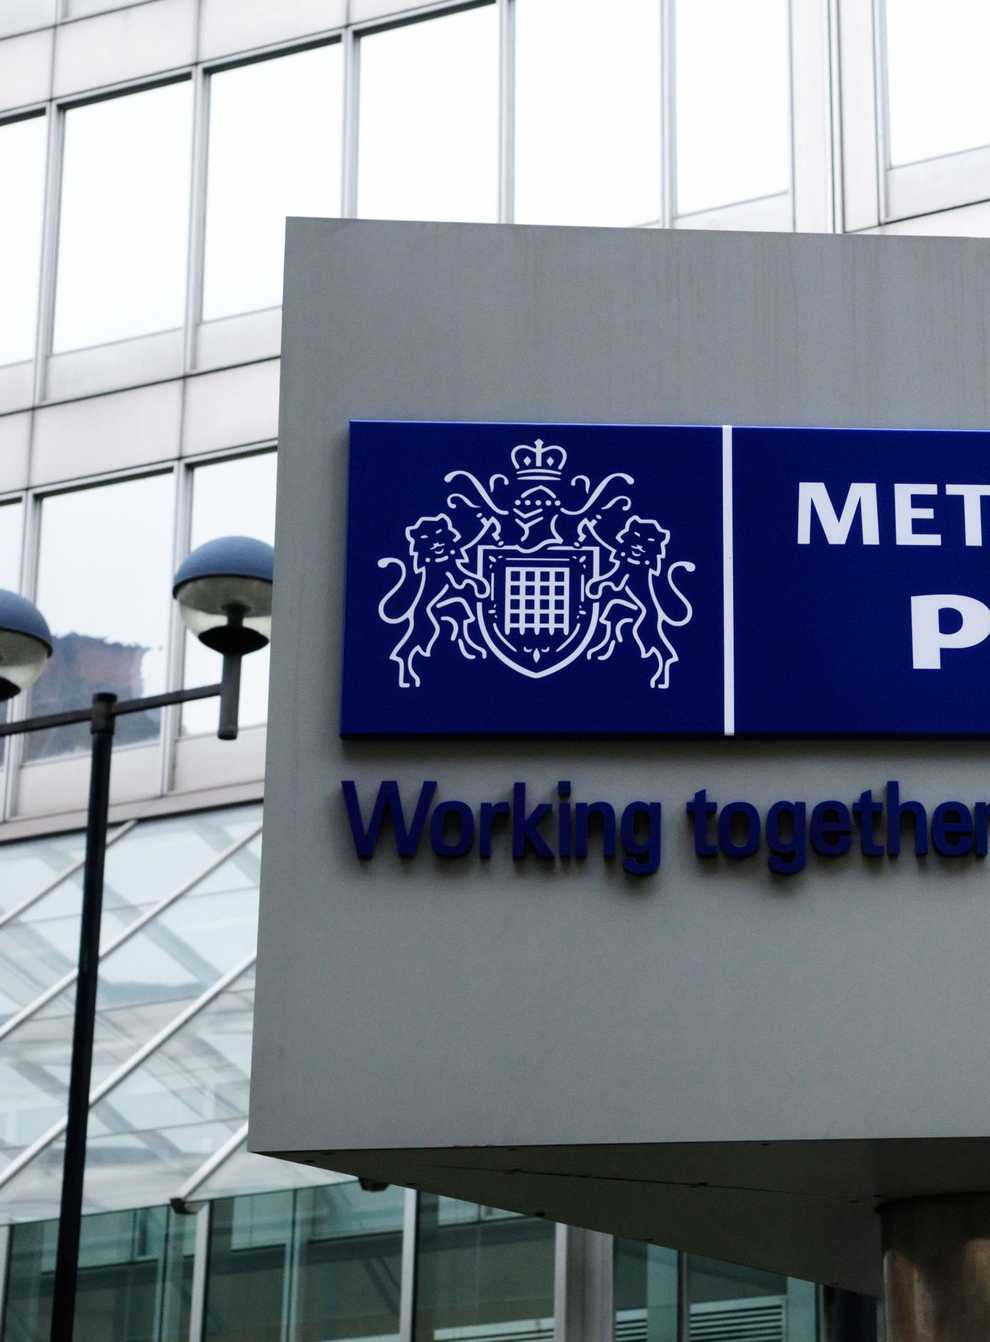 The head of the Metropolitan Police said it is “completely mad” the force has around 100 officers not trusted to speak to the public (Alistair Laming/Alamy/PA)